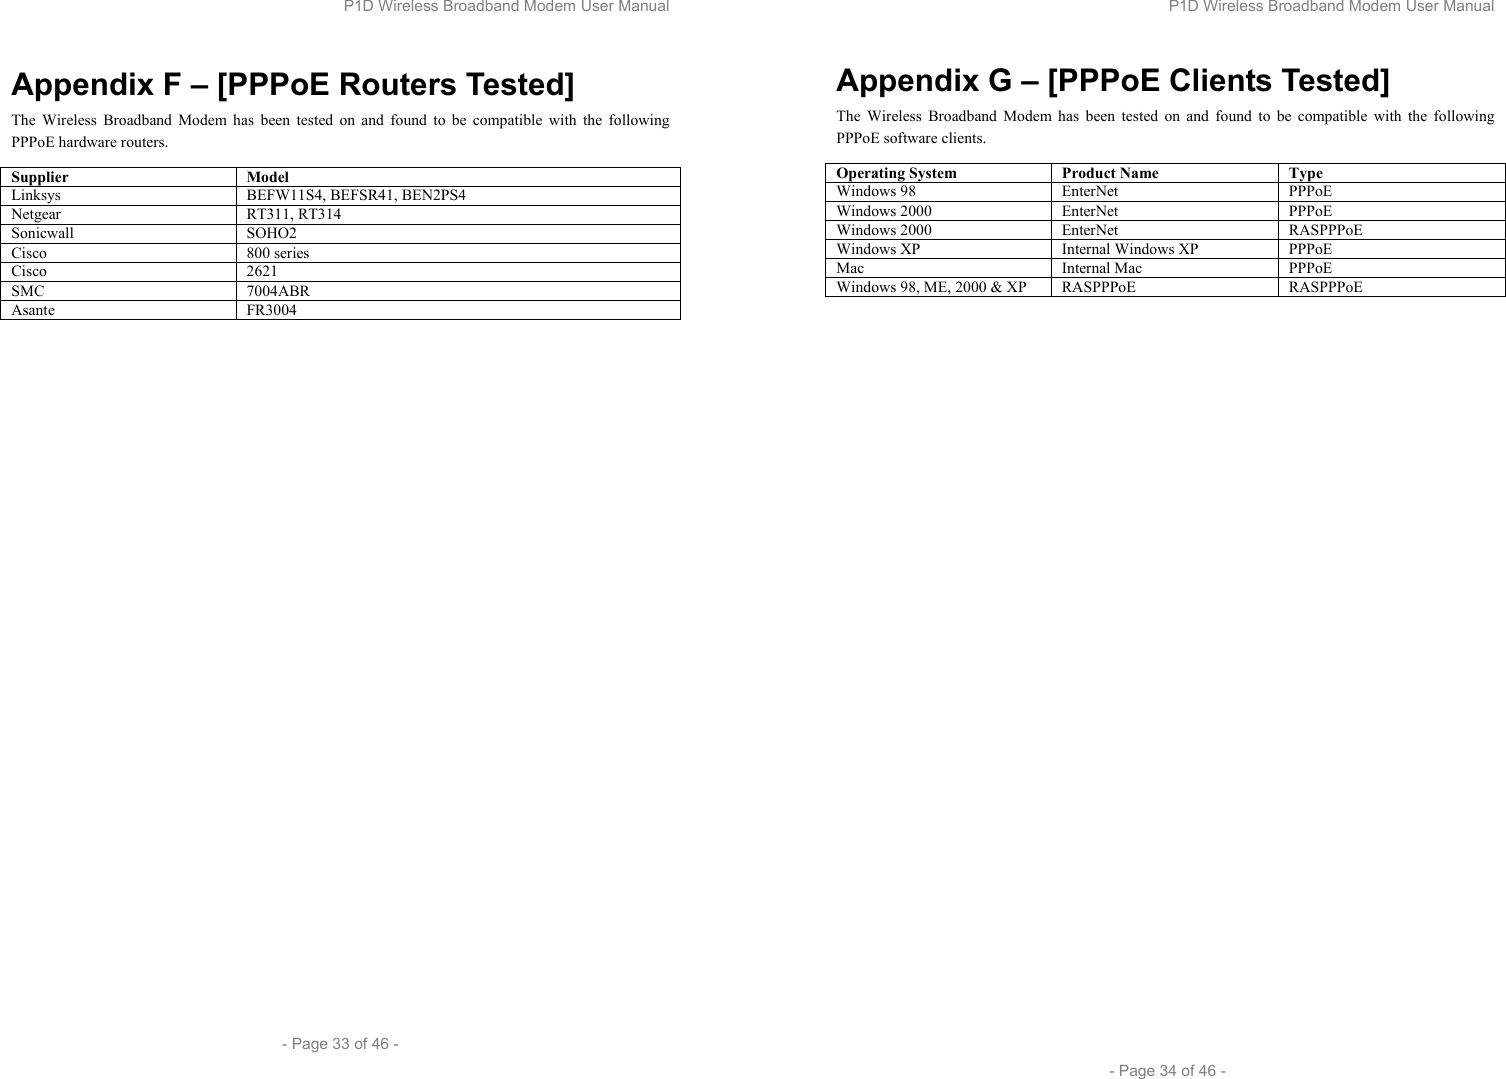 P1D Wireless Broadband Modem User Manual  - Page 33 of 46 -  Appendix F – [PPPoE Routers Tested] The Wireless Broadband Modem has been tested on and found to be compatible with the following PPPoE hardware routers. Supplier Model Linksys  BEFW11S4, BEFSR41, BEN2PS4 Netgear RT311, RT314 Sonicwall SOHO2 Cisco 800 series Cisco 2621 SMC 7004ABR Asante FR3004 P1D Wireless Broadband Modem User Manual  - Page 34 of 46 - Appendix G – [PPPoE Clients Tested] The Wireless Broadband Modem has been tested on and found to be compatible with the following PPPoE software clients. Operating System  Product Name  Type Windows 98  EnterNet  PPPoE Windows 2000  EnterNet  PPPoE Windows 2000  EnterNet  RASPPPoE Windows XP  Internal Windows XP  PPPoE Mac Internal Mac PPPoE Windows 98, ME, 2000 &amp; XP  RASPPPoE  RASPPPoE  